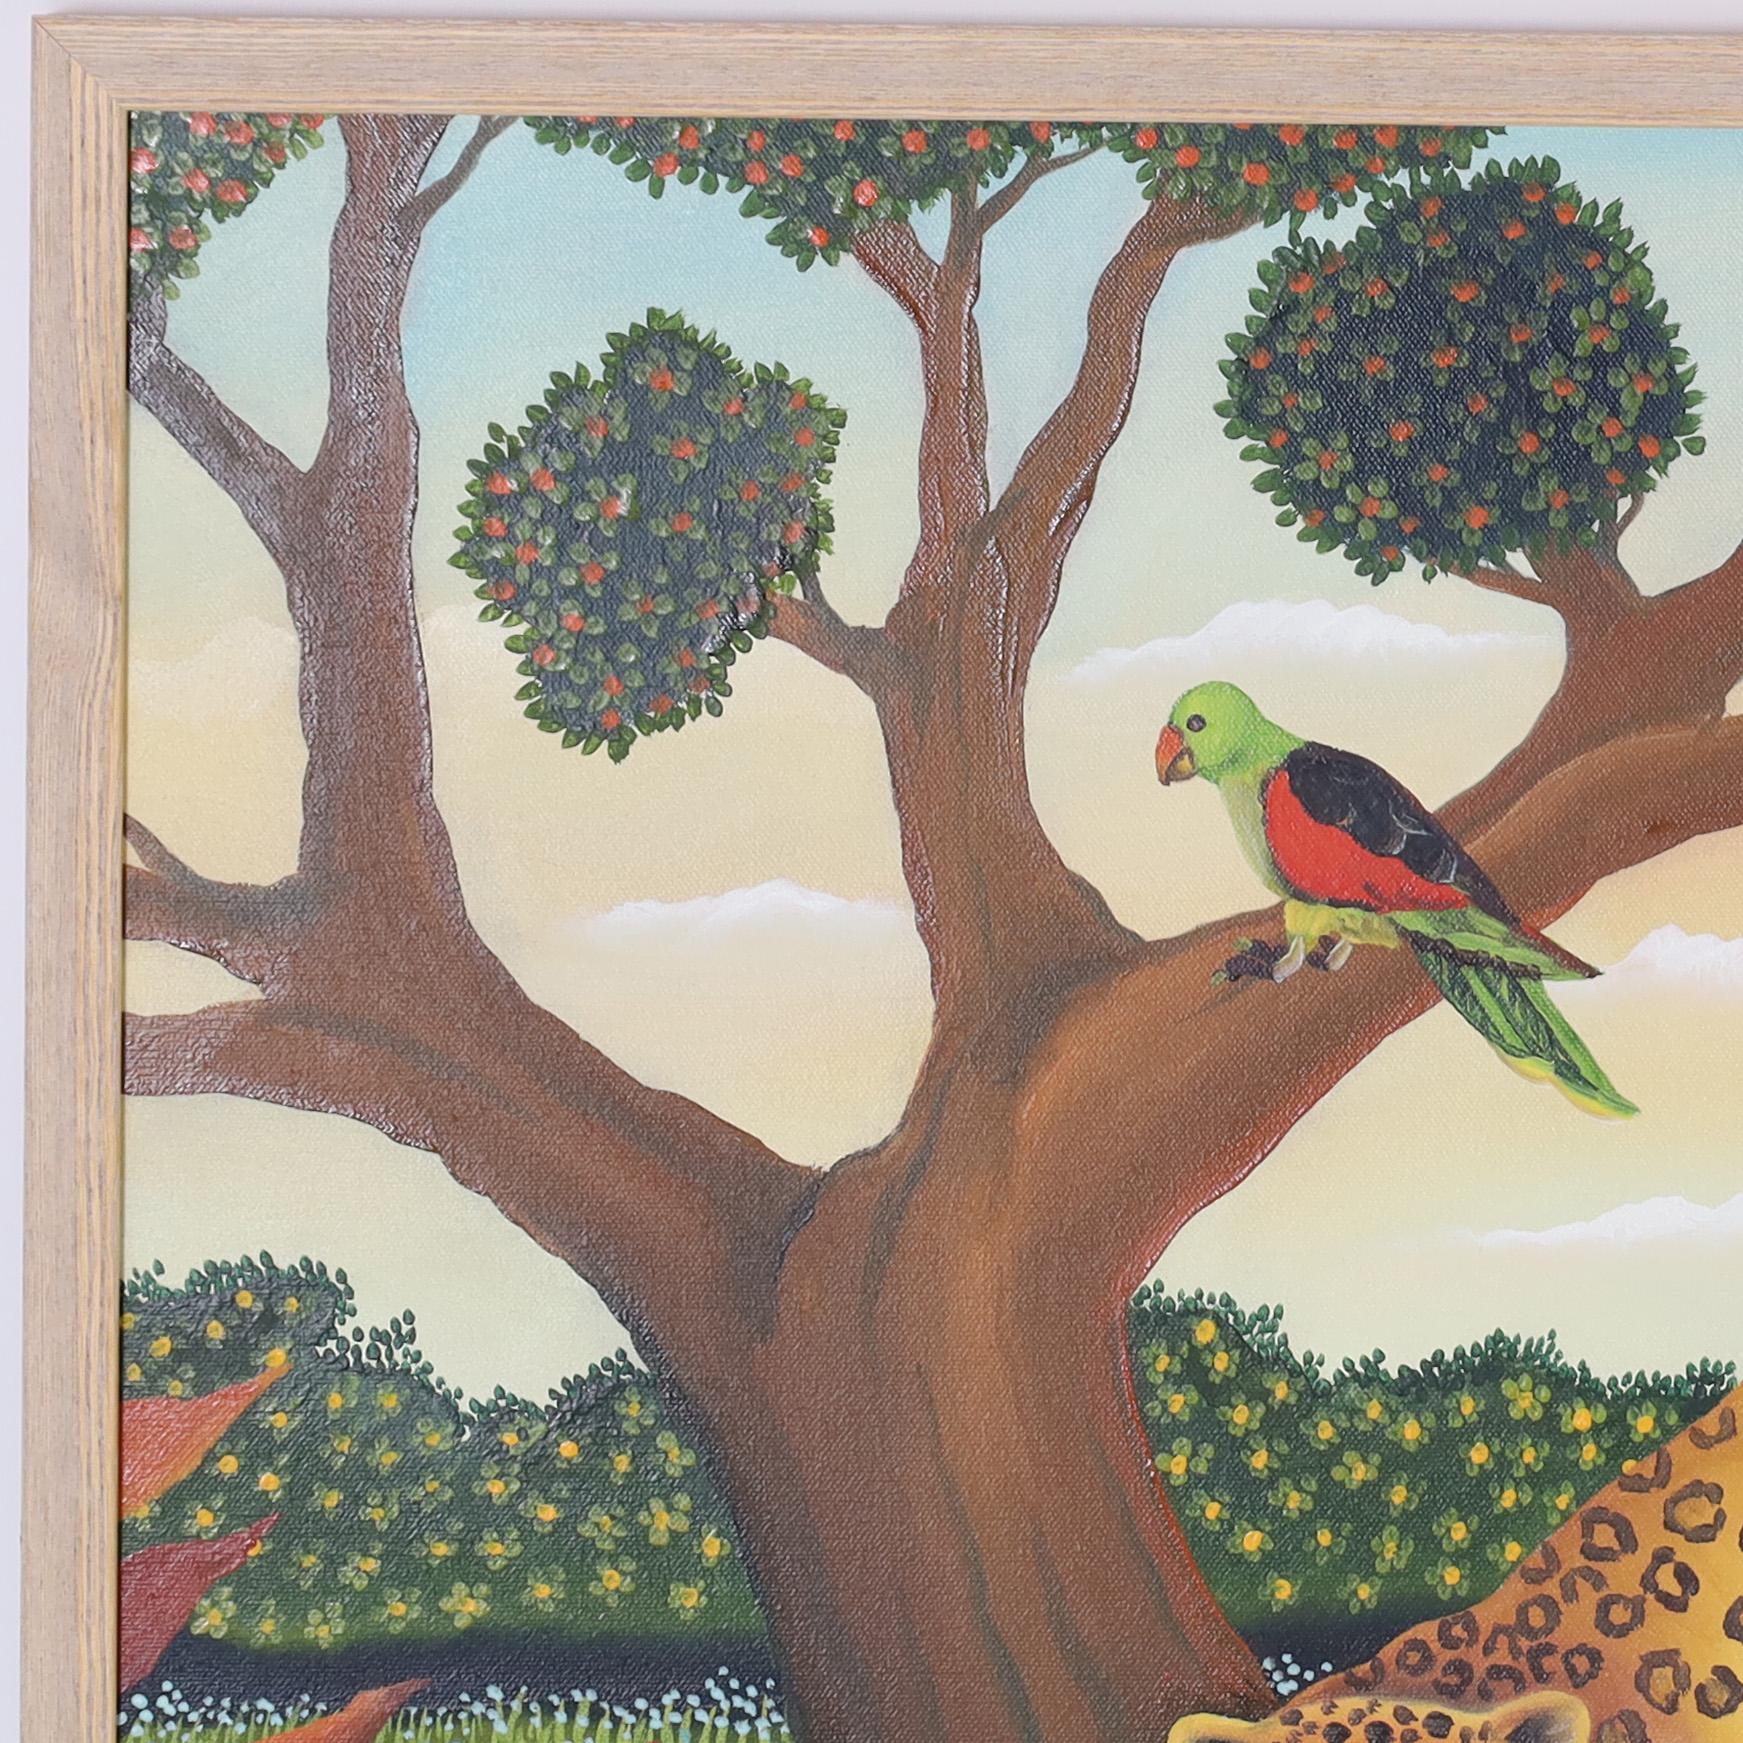 Charming mid century acrylic painting on canvas of a leopard with fauna and flora, executed in an enchanting naive style. Signed Paradis 82 and presented in a wood frame. 